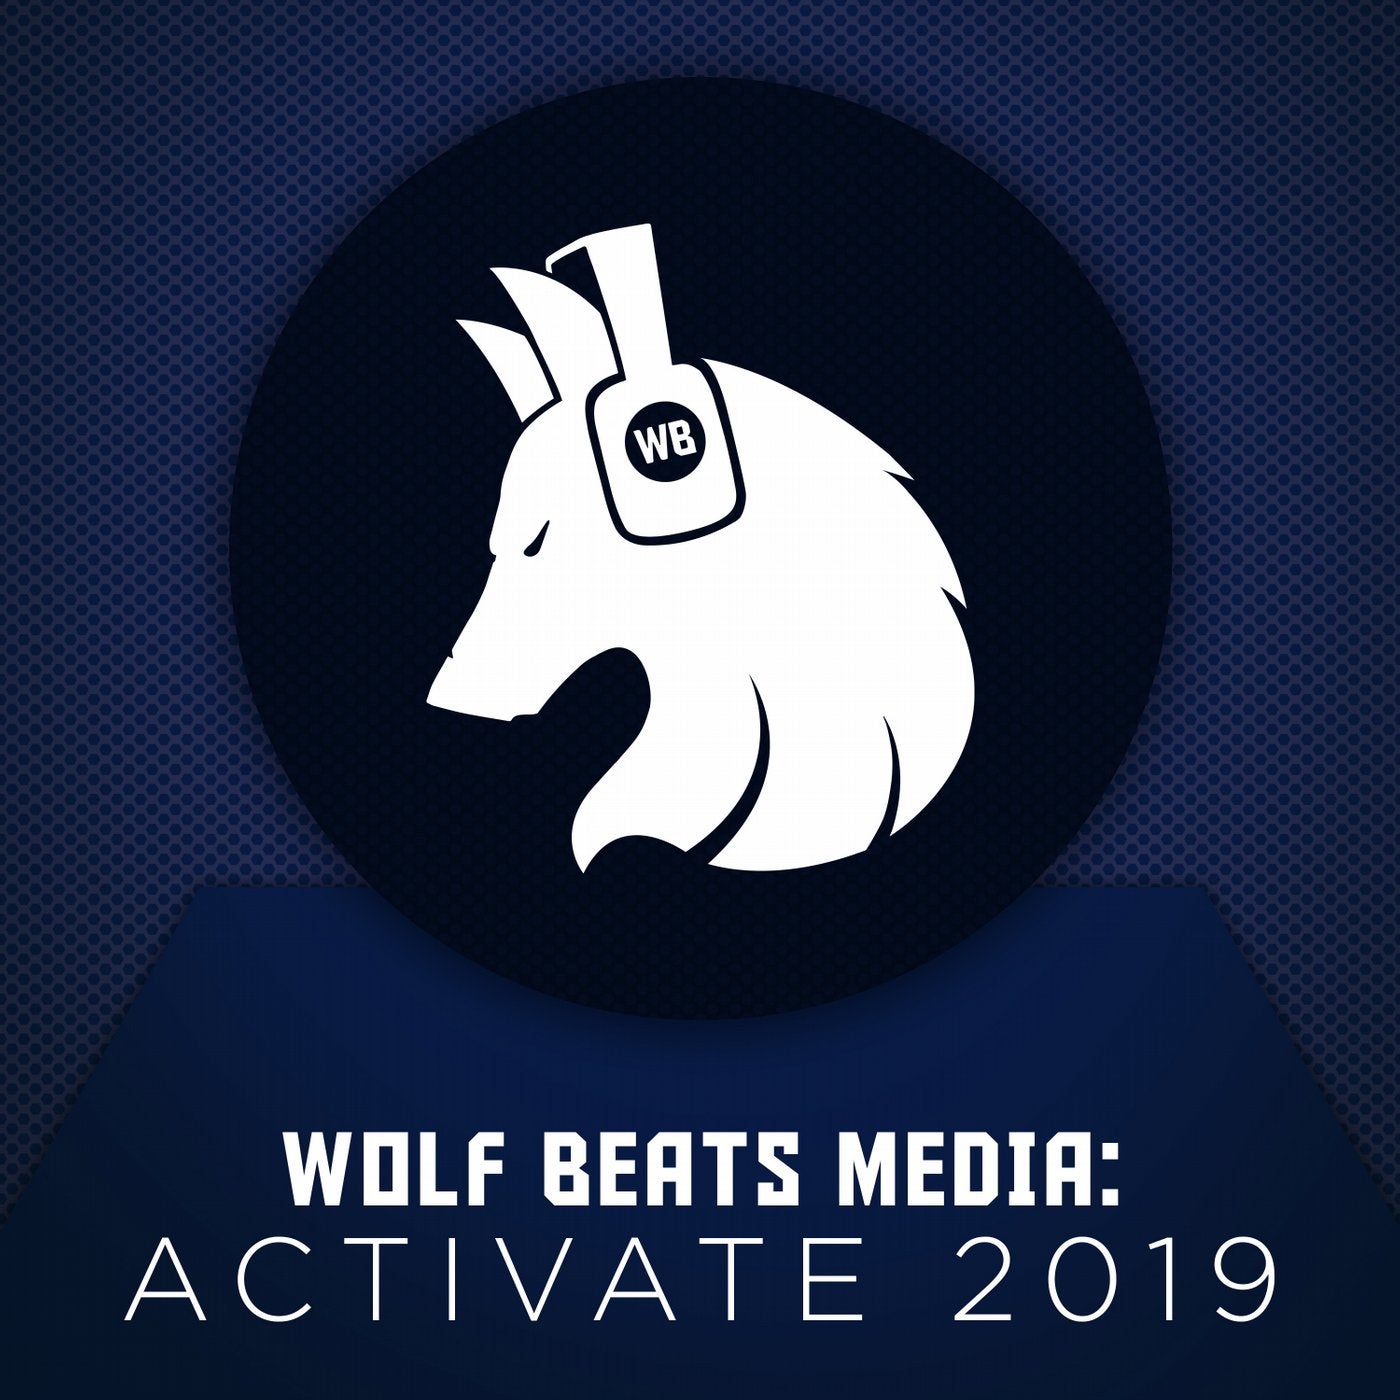 Wolf Beats Media: Activate 2019